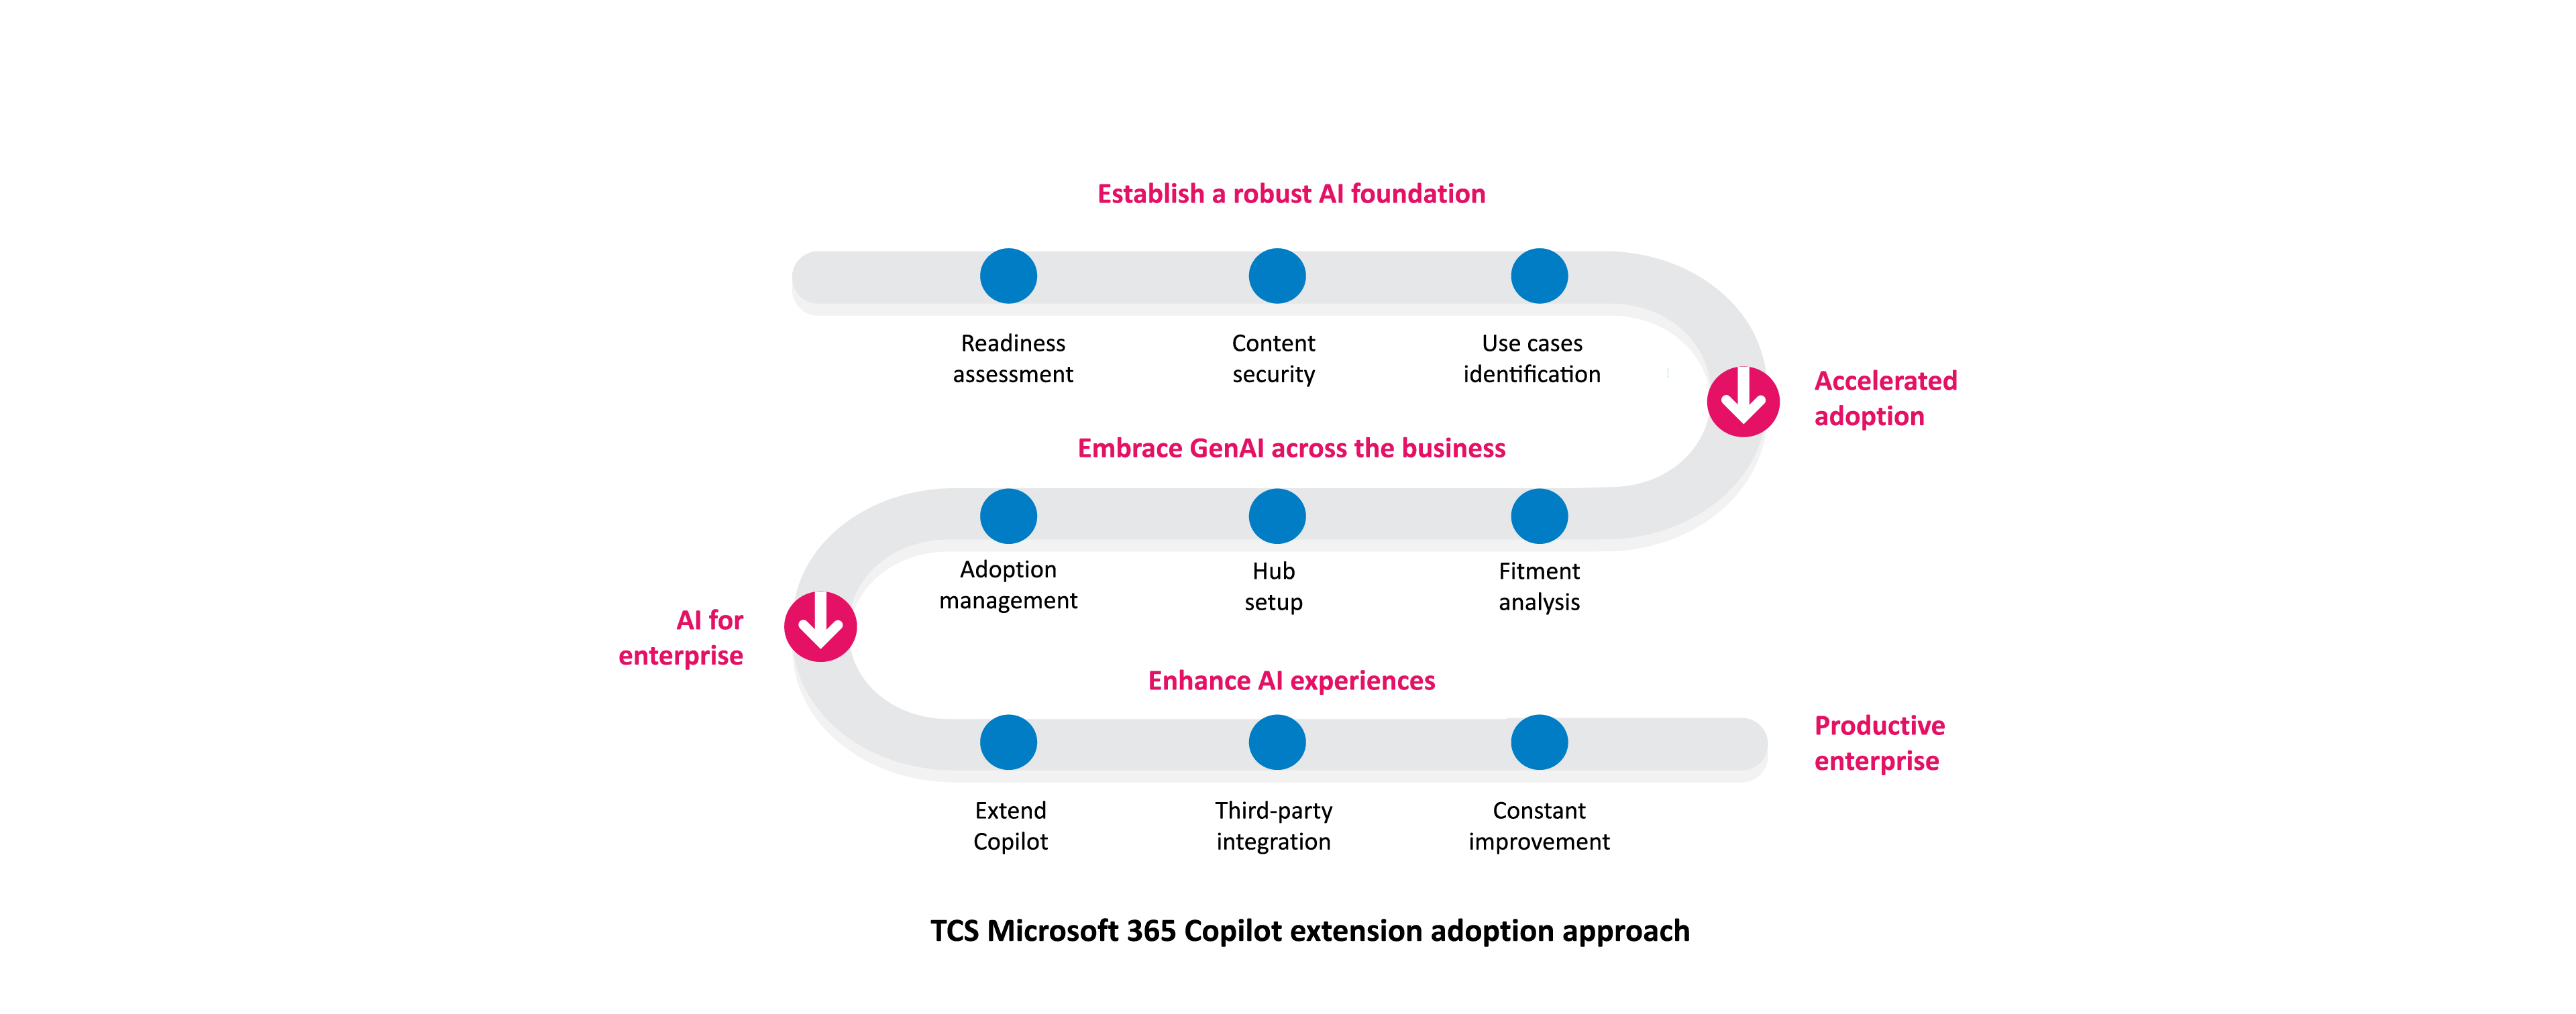  From AI foundation to improving experiences, this infographic shows a TCS Microsoft 365 Copilot extension adoption approach. 